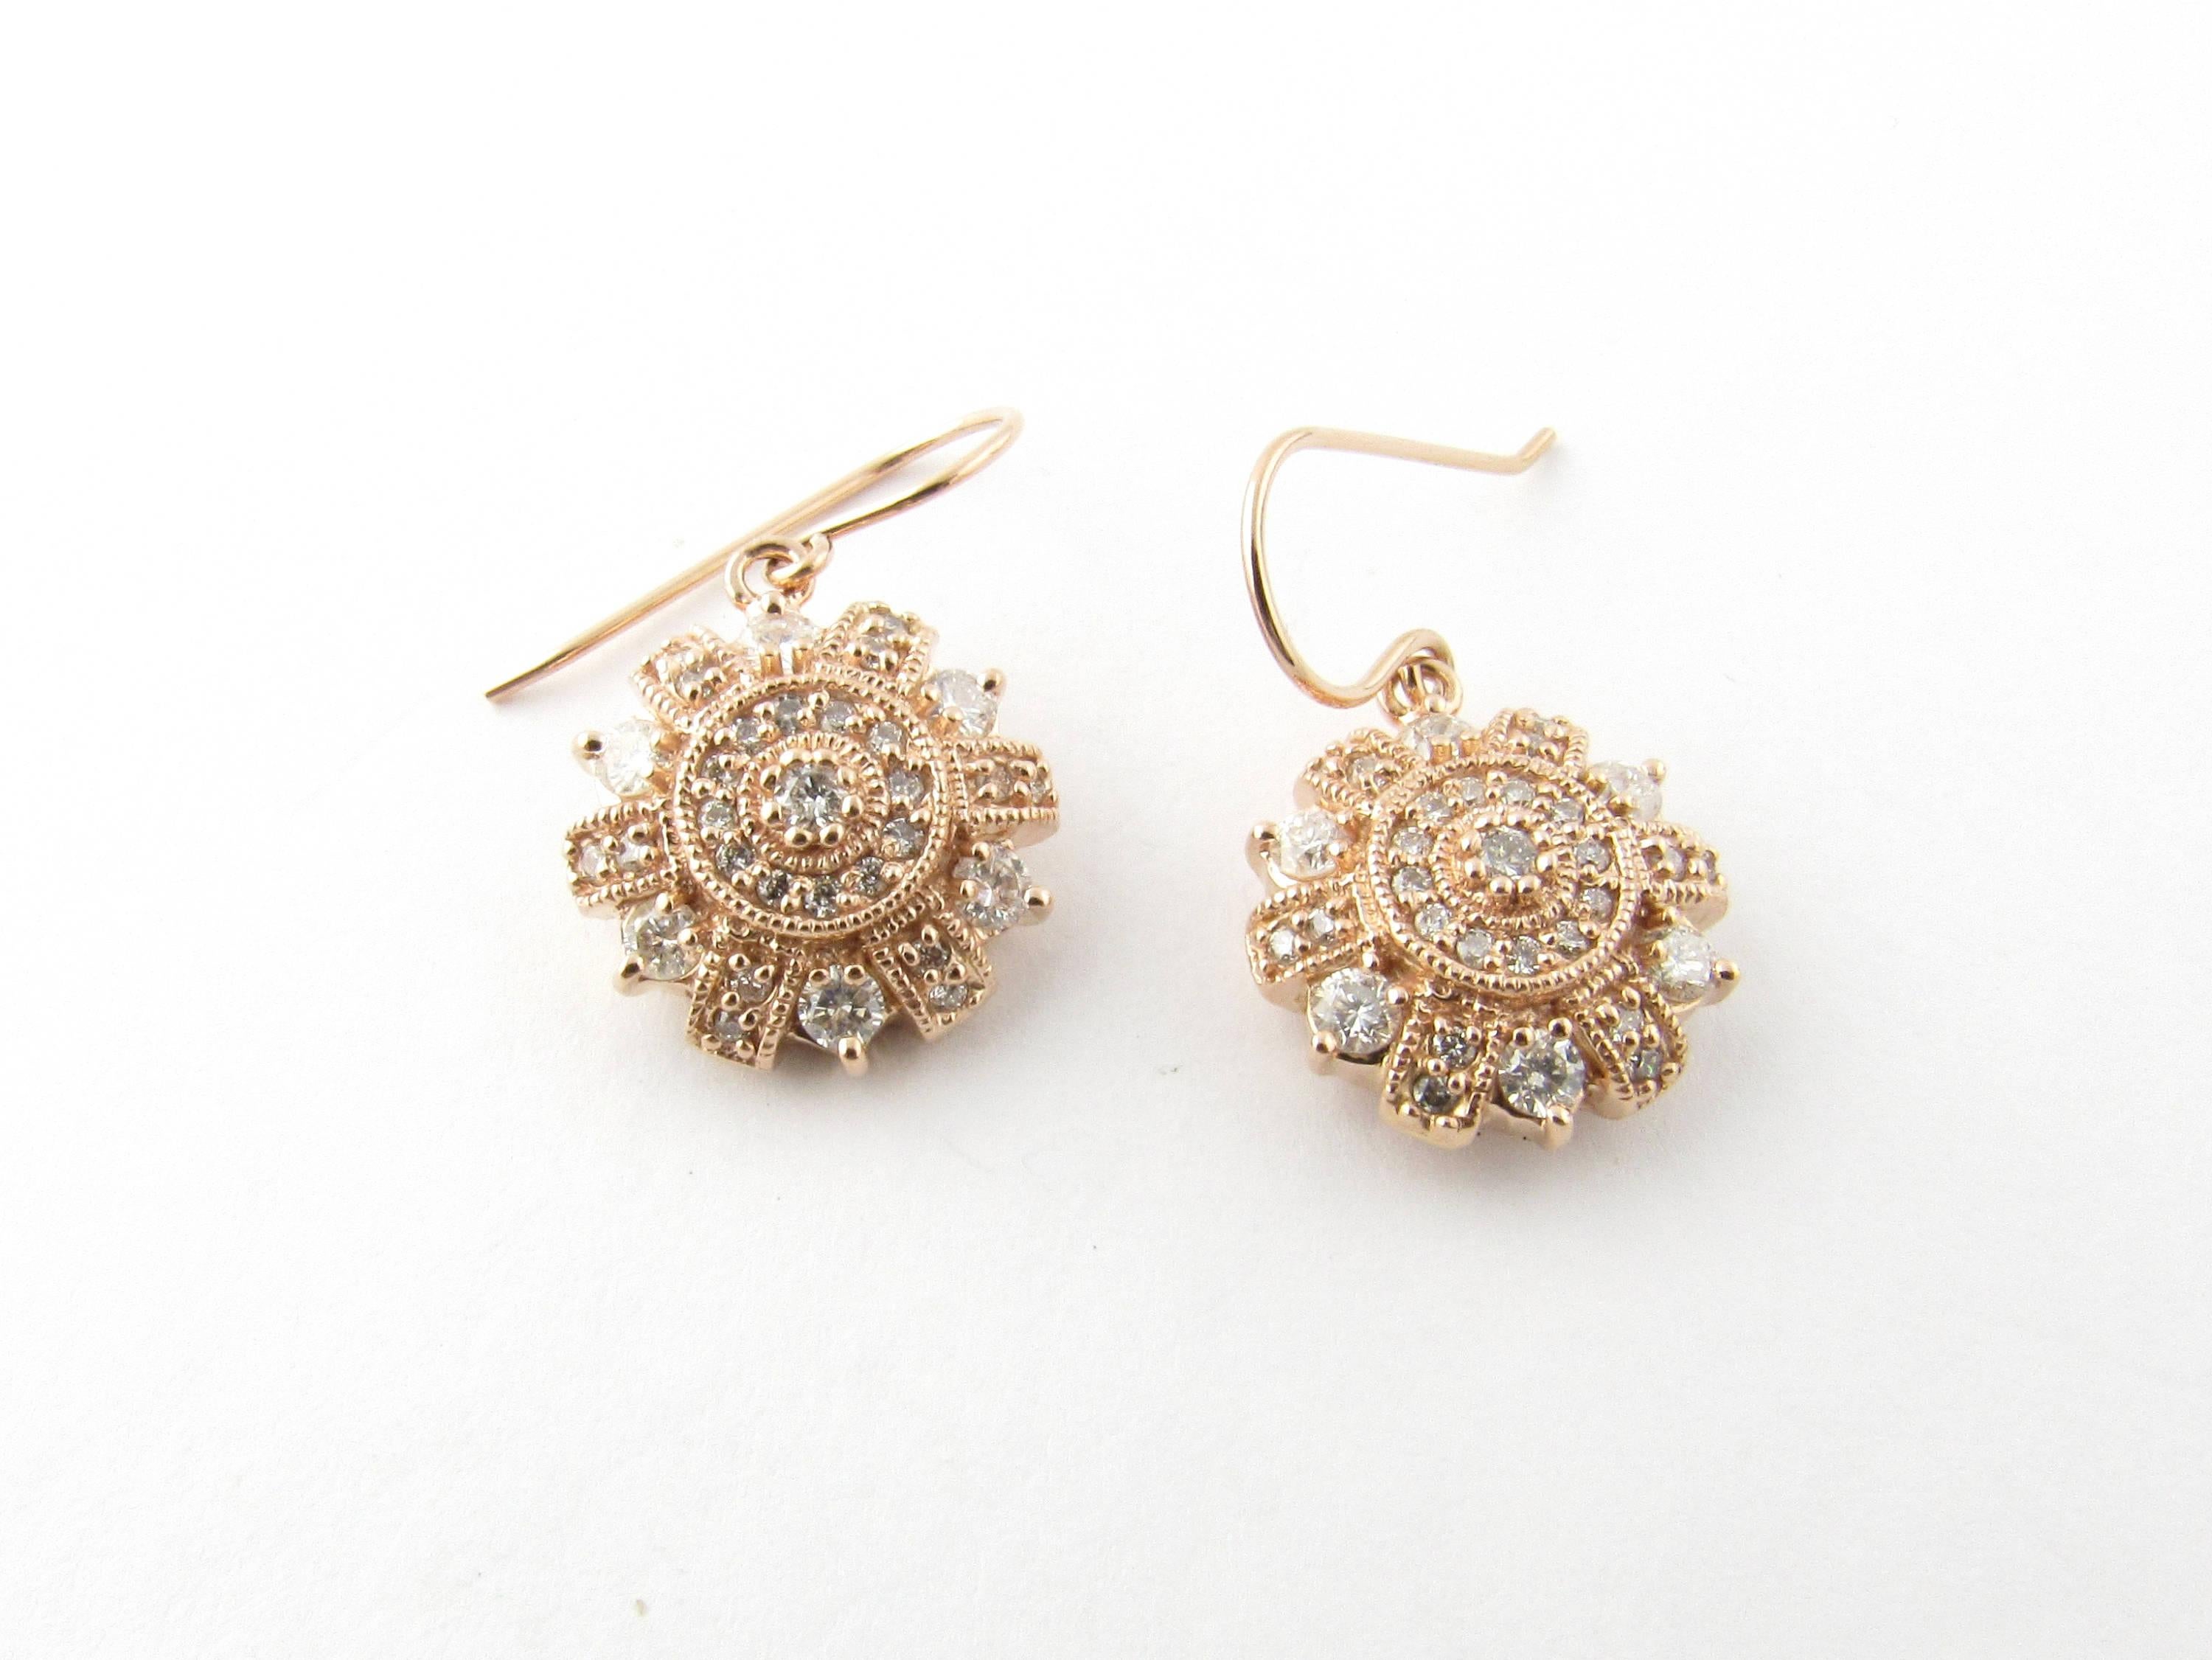 Vintage 14 Karat Rose Gold and Diamond Dangle Earrings

These dazzling earrings each feature 25 round brilliant cut diamonds (.45 ct. twt. each earring) set in beautifully detailed 14K rose gold. French wire closures measure 11 mm. Matching necklace